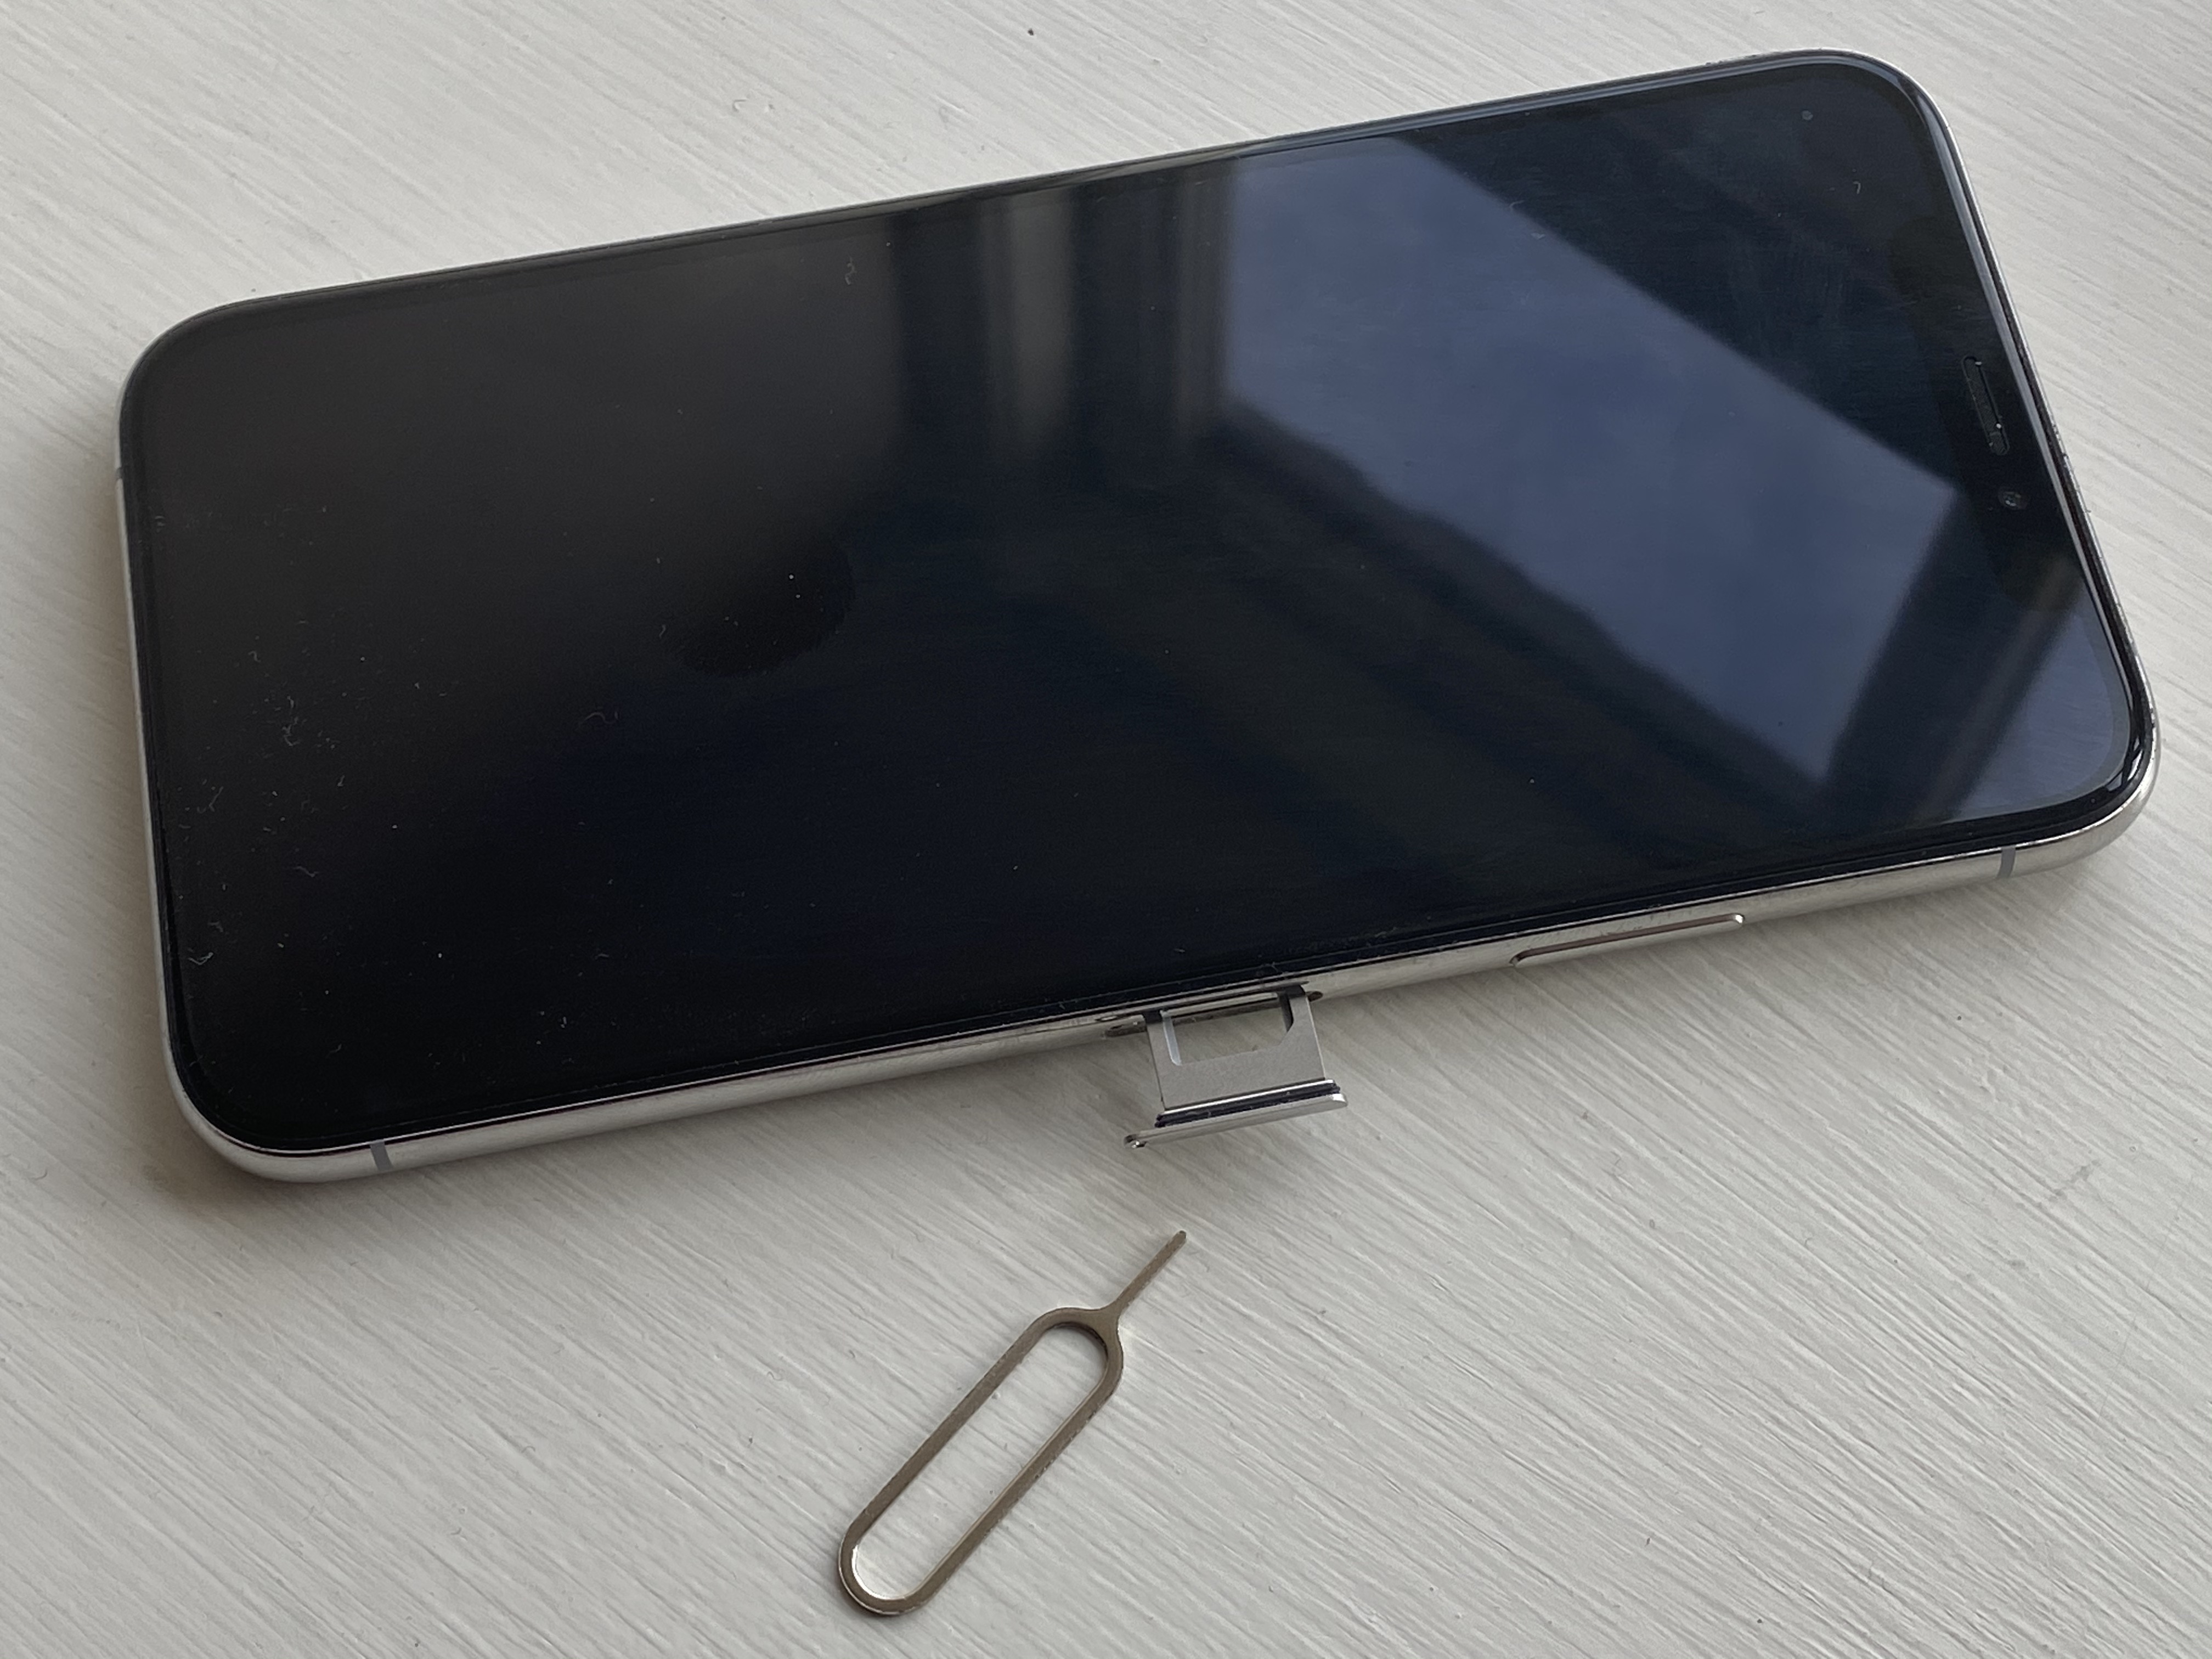 How To Remove The Sim Card From An Iphone Or Cellular Ipad Macrumors